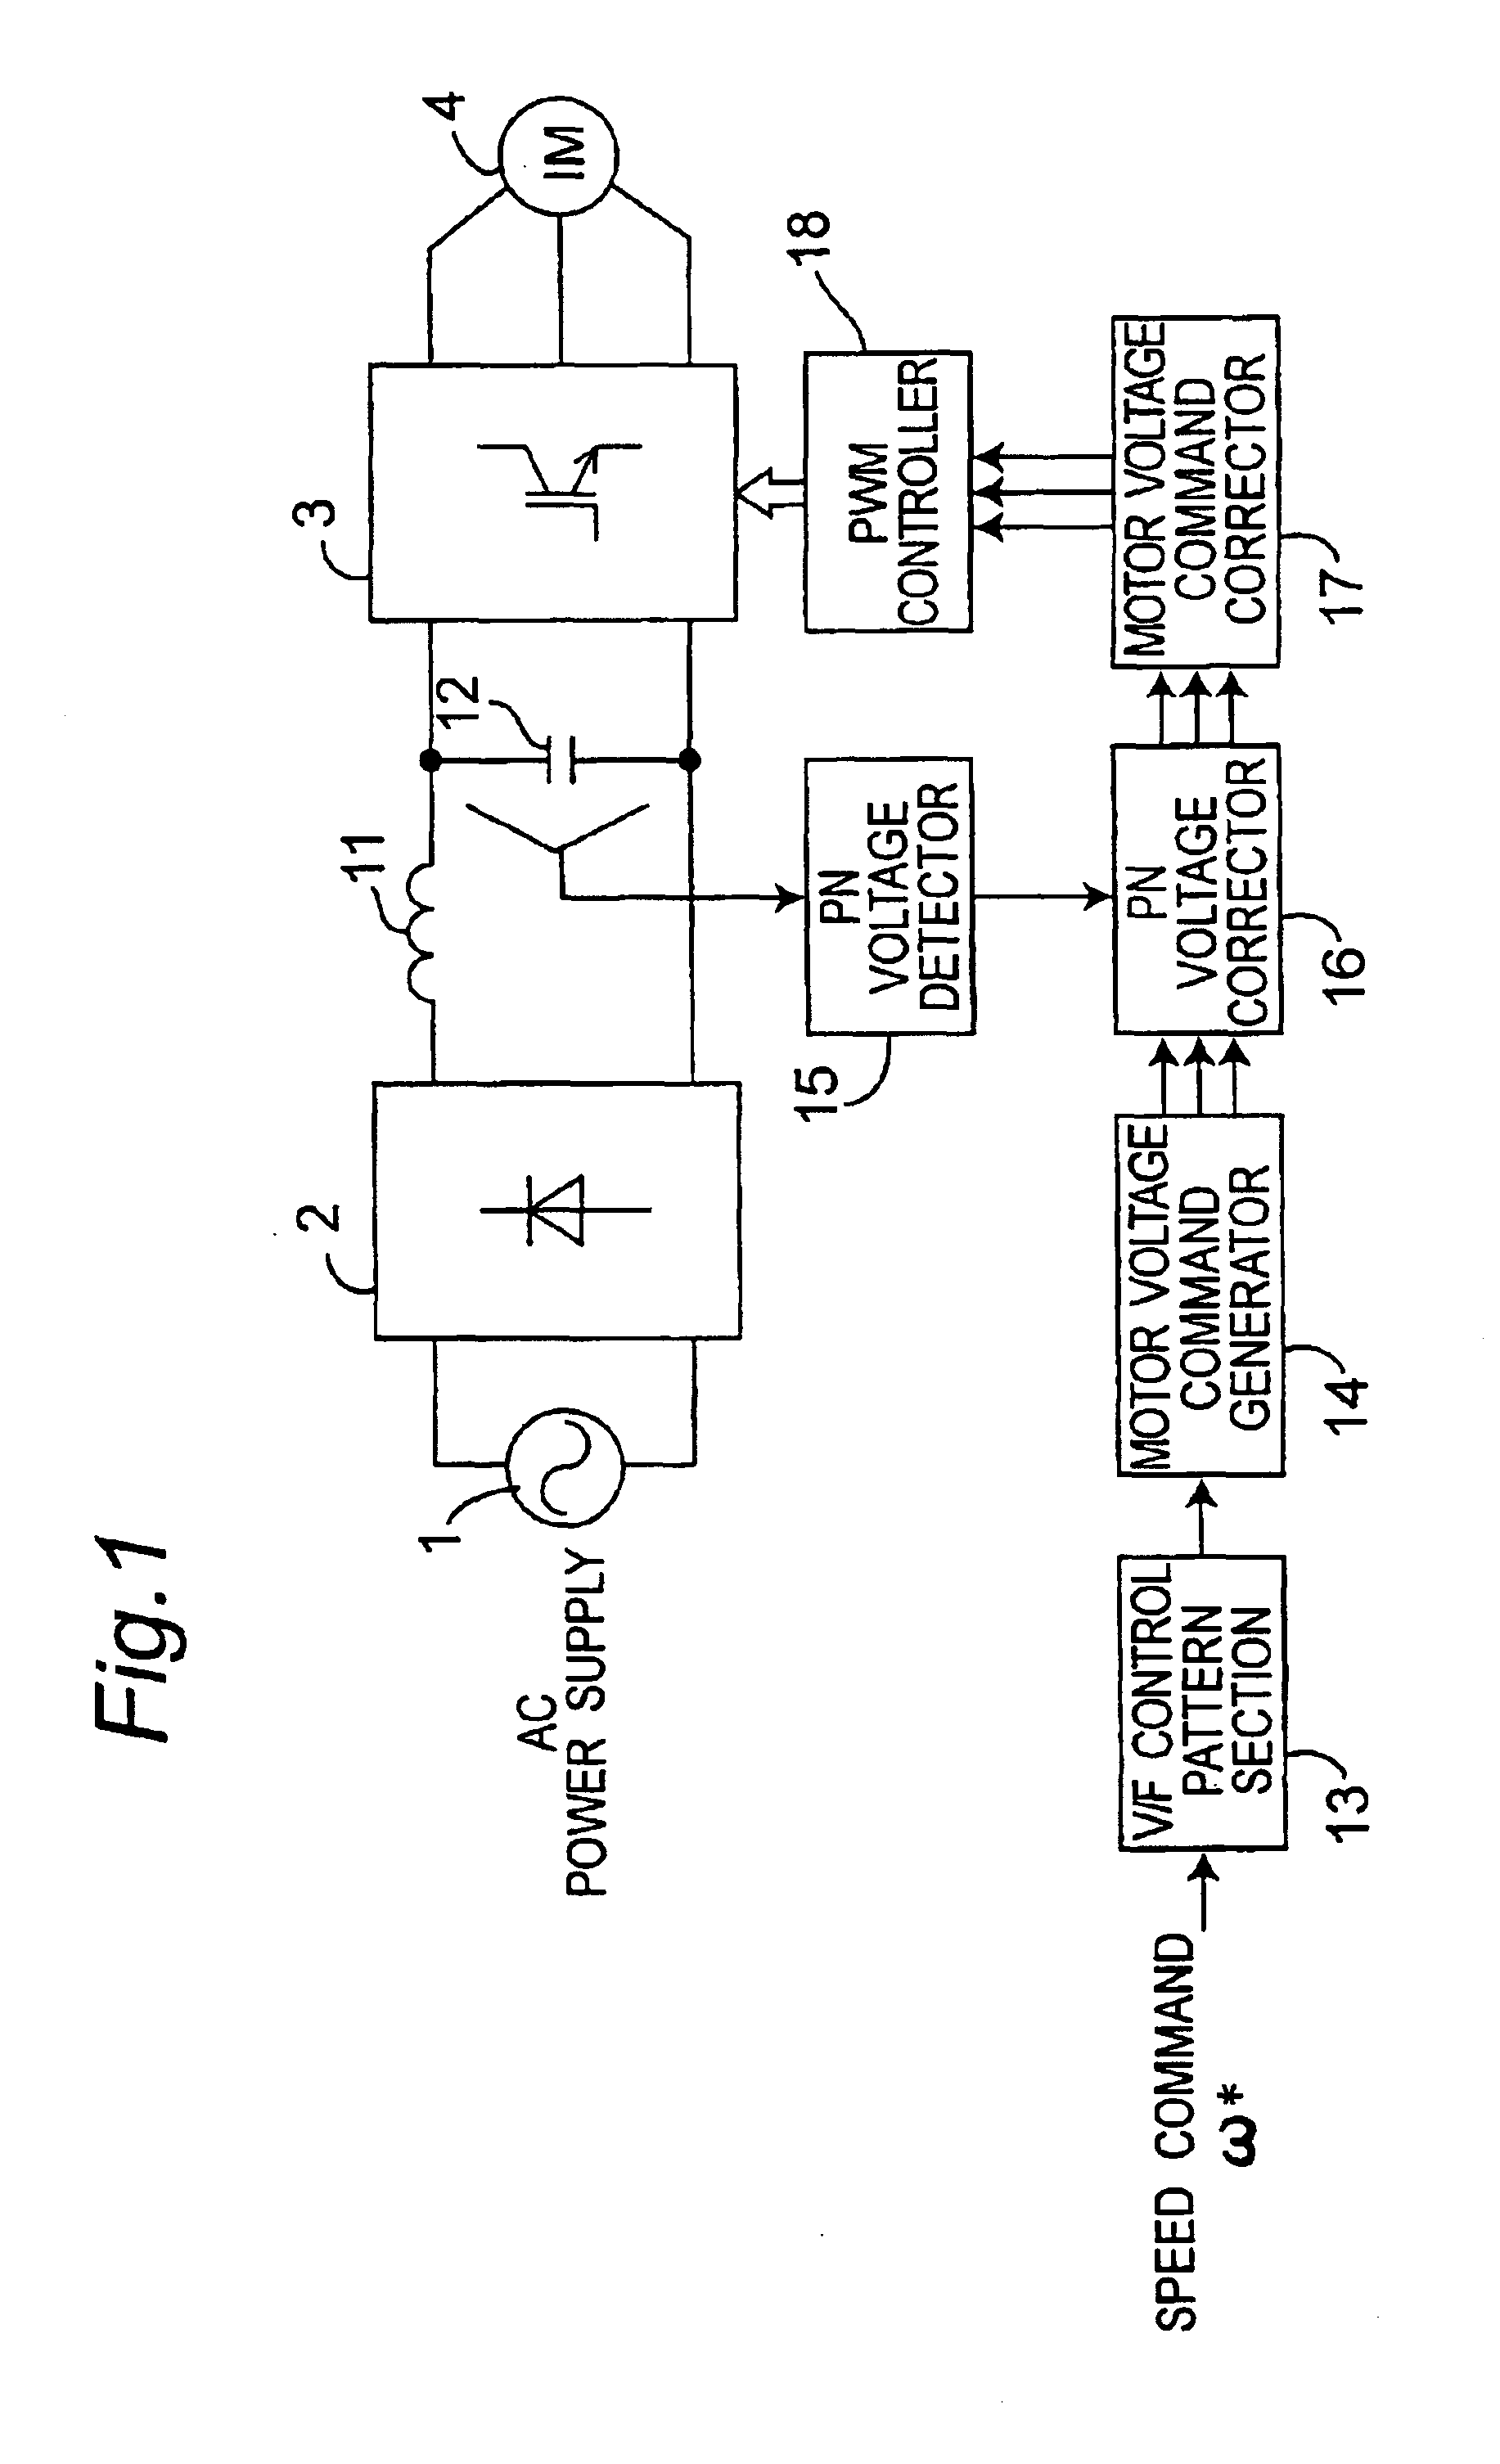 Inverter controller for driving motor and air conditioner using inverter controller